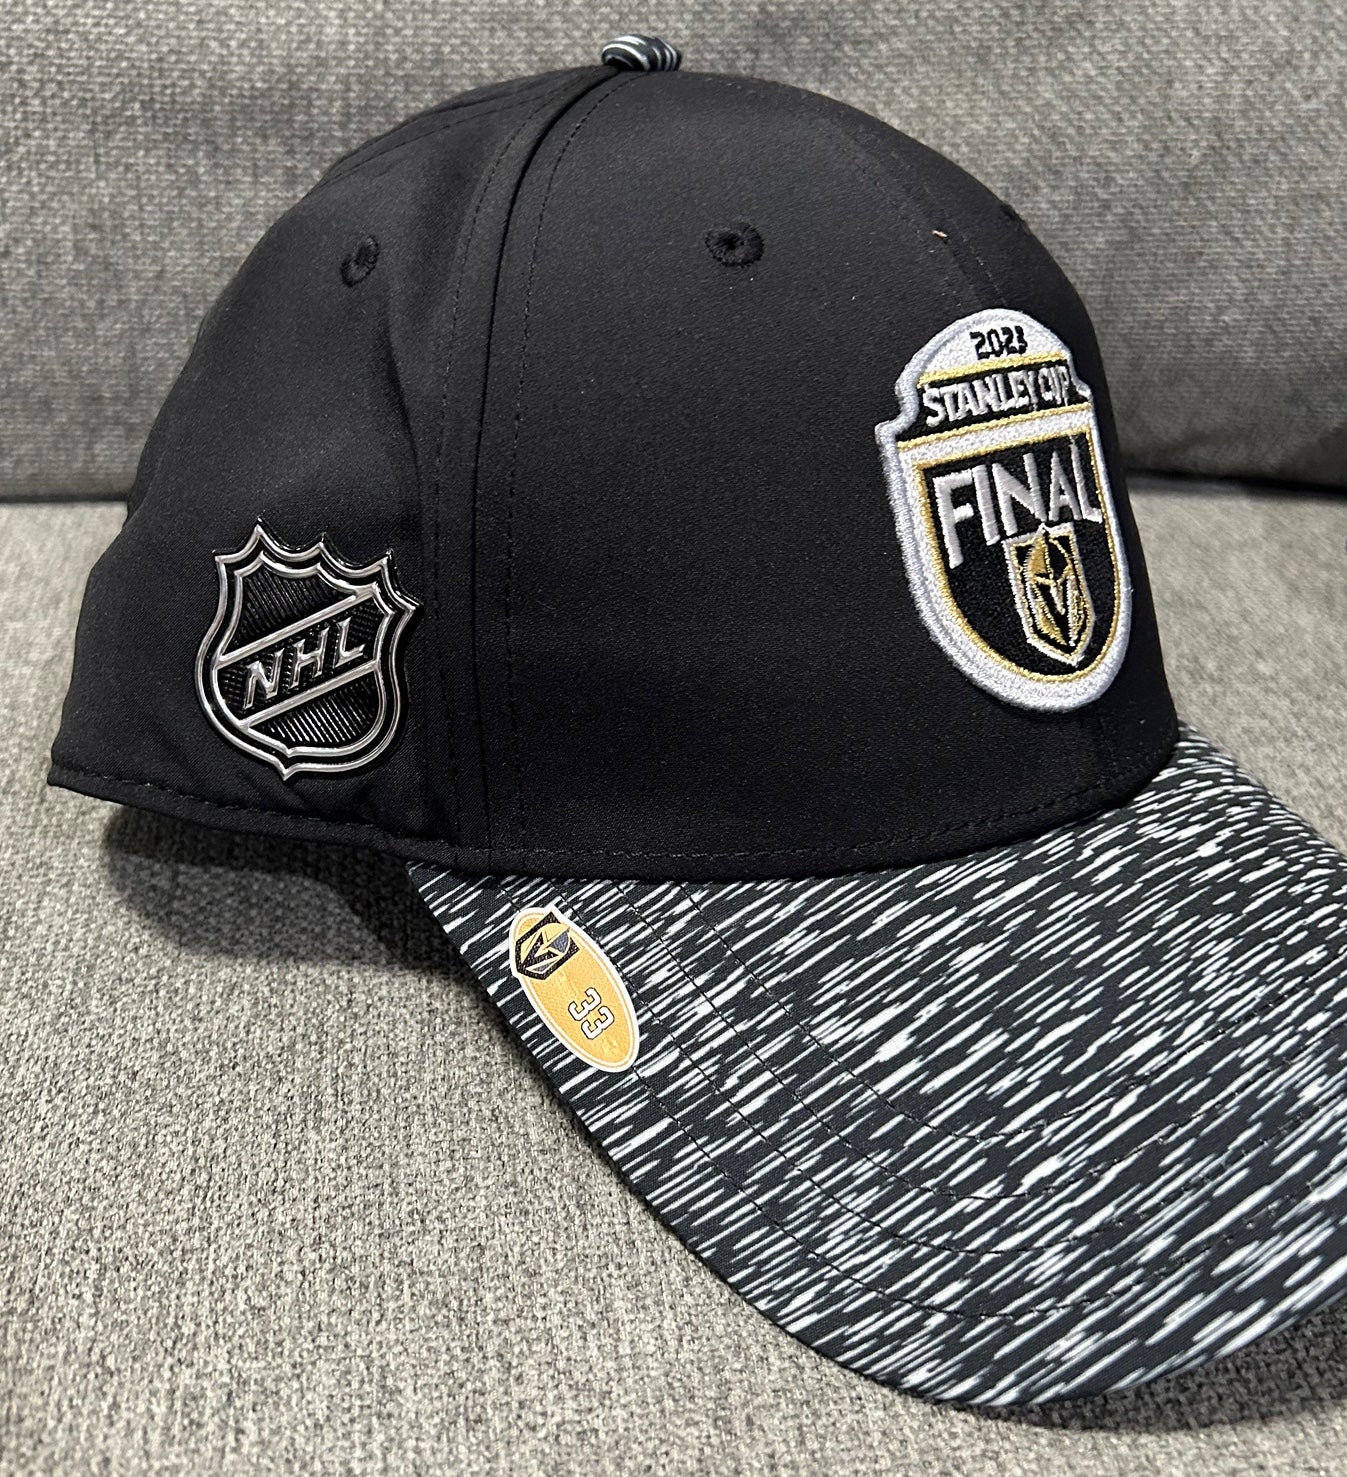 Top-selling Item] Adin Hill 33 Vegas Golden Knights Stanley Cup